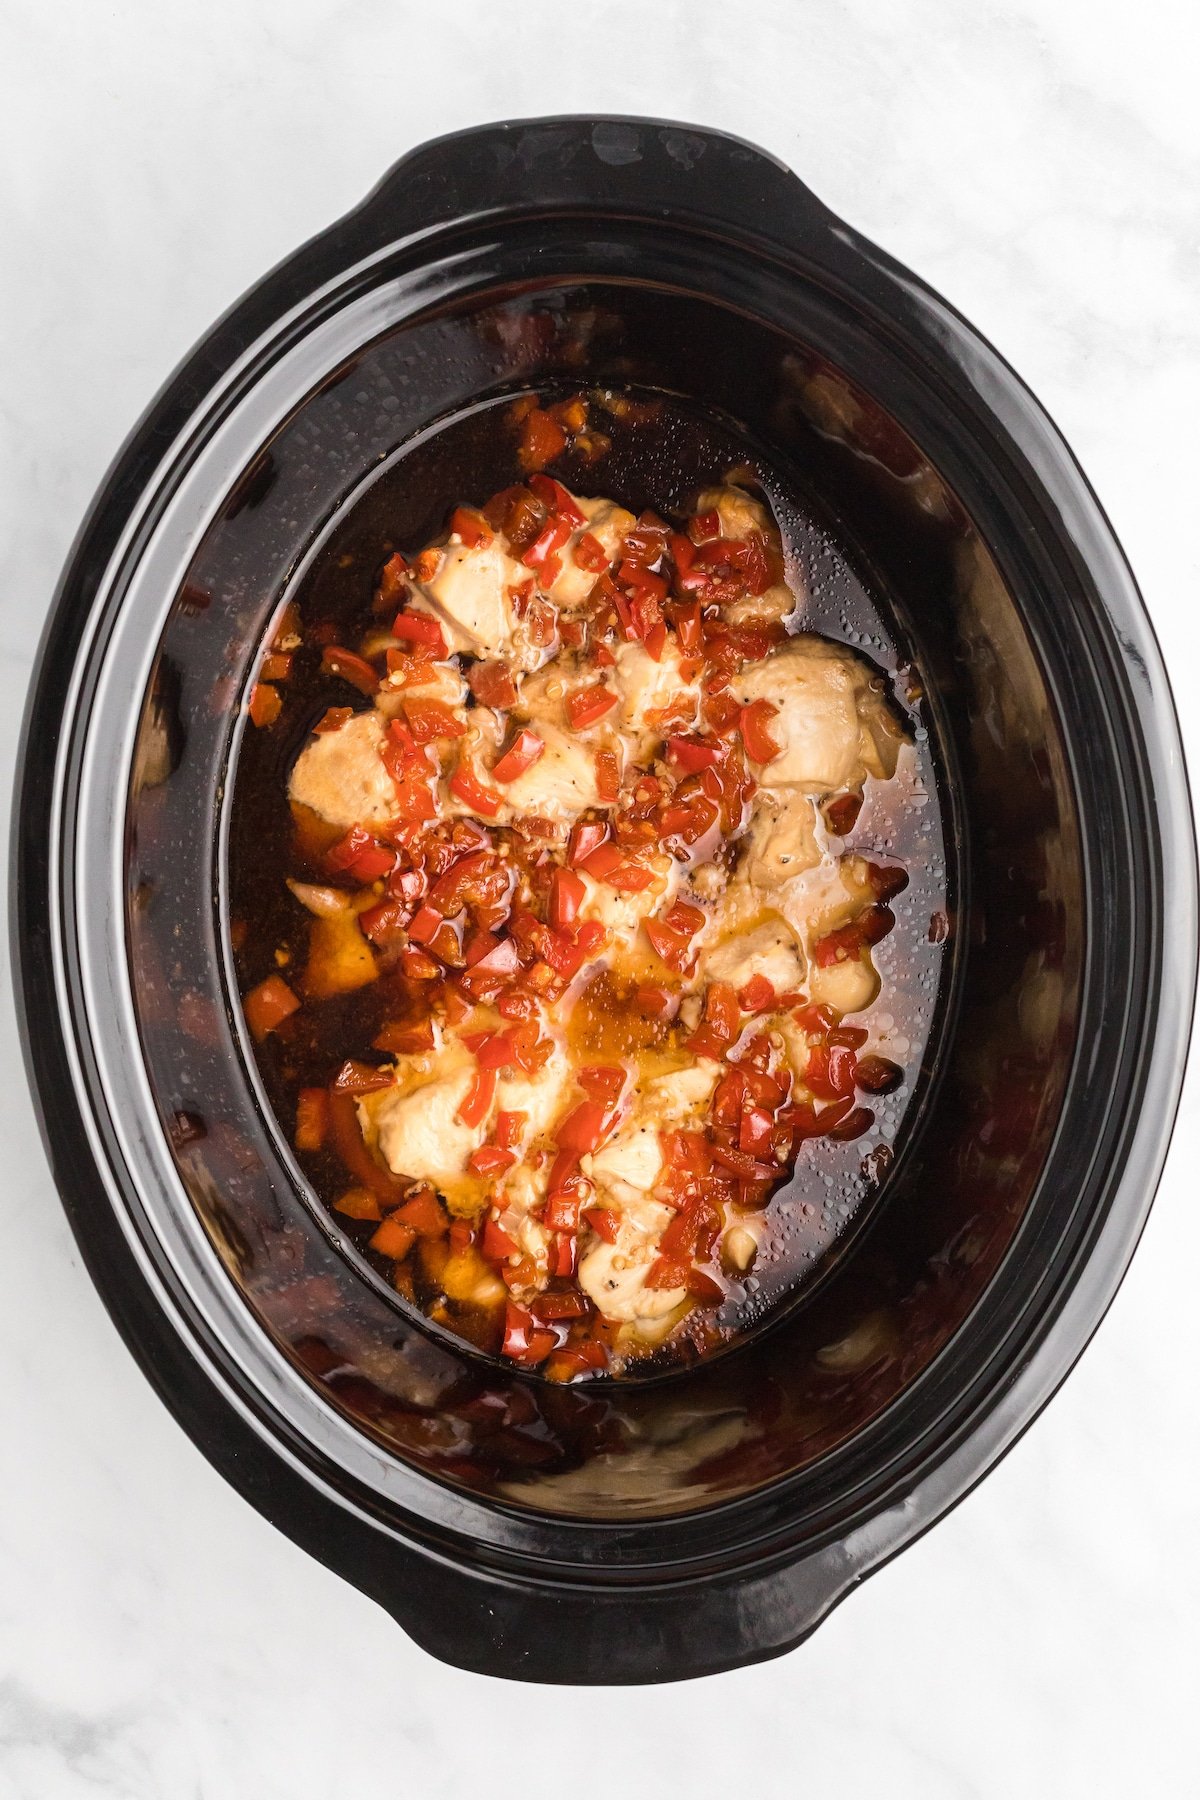 Cooked teriyaki chicken in the slow cooker